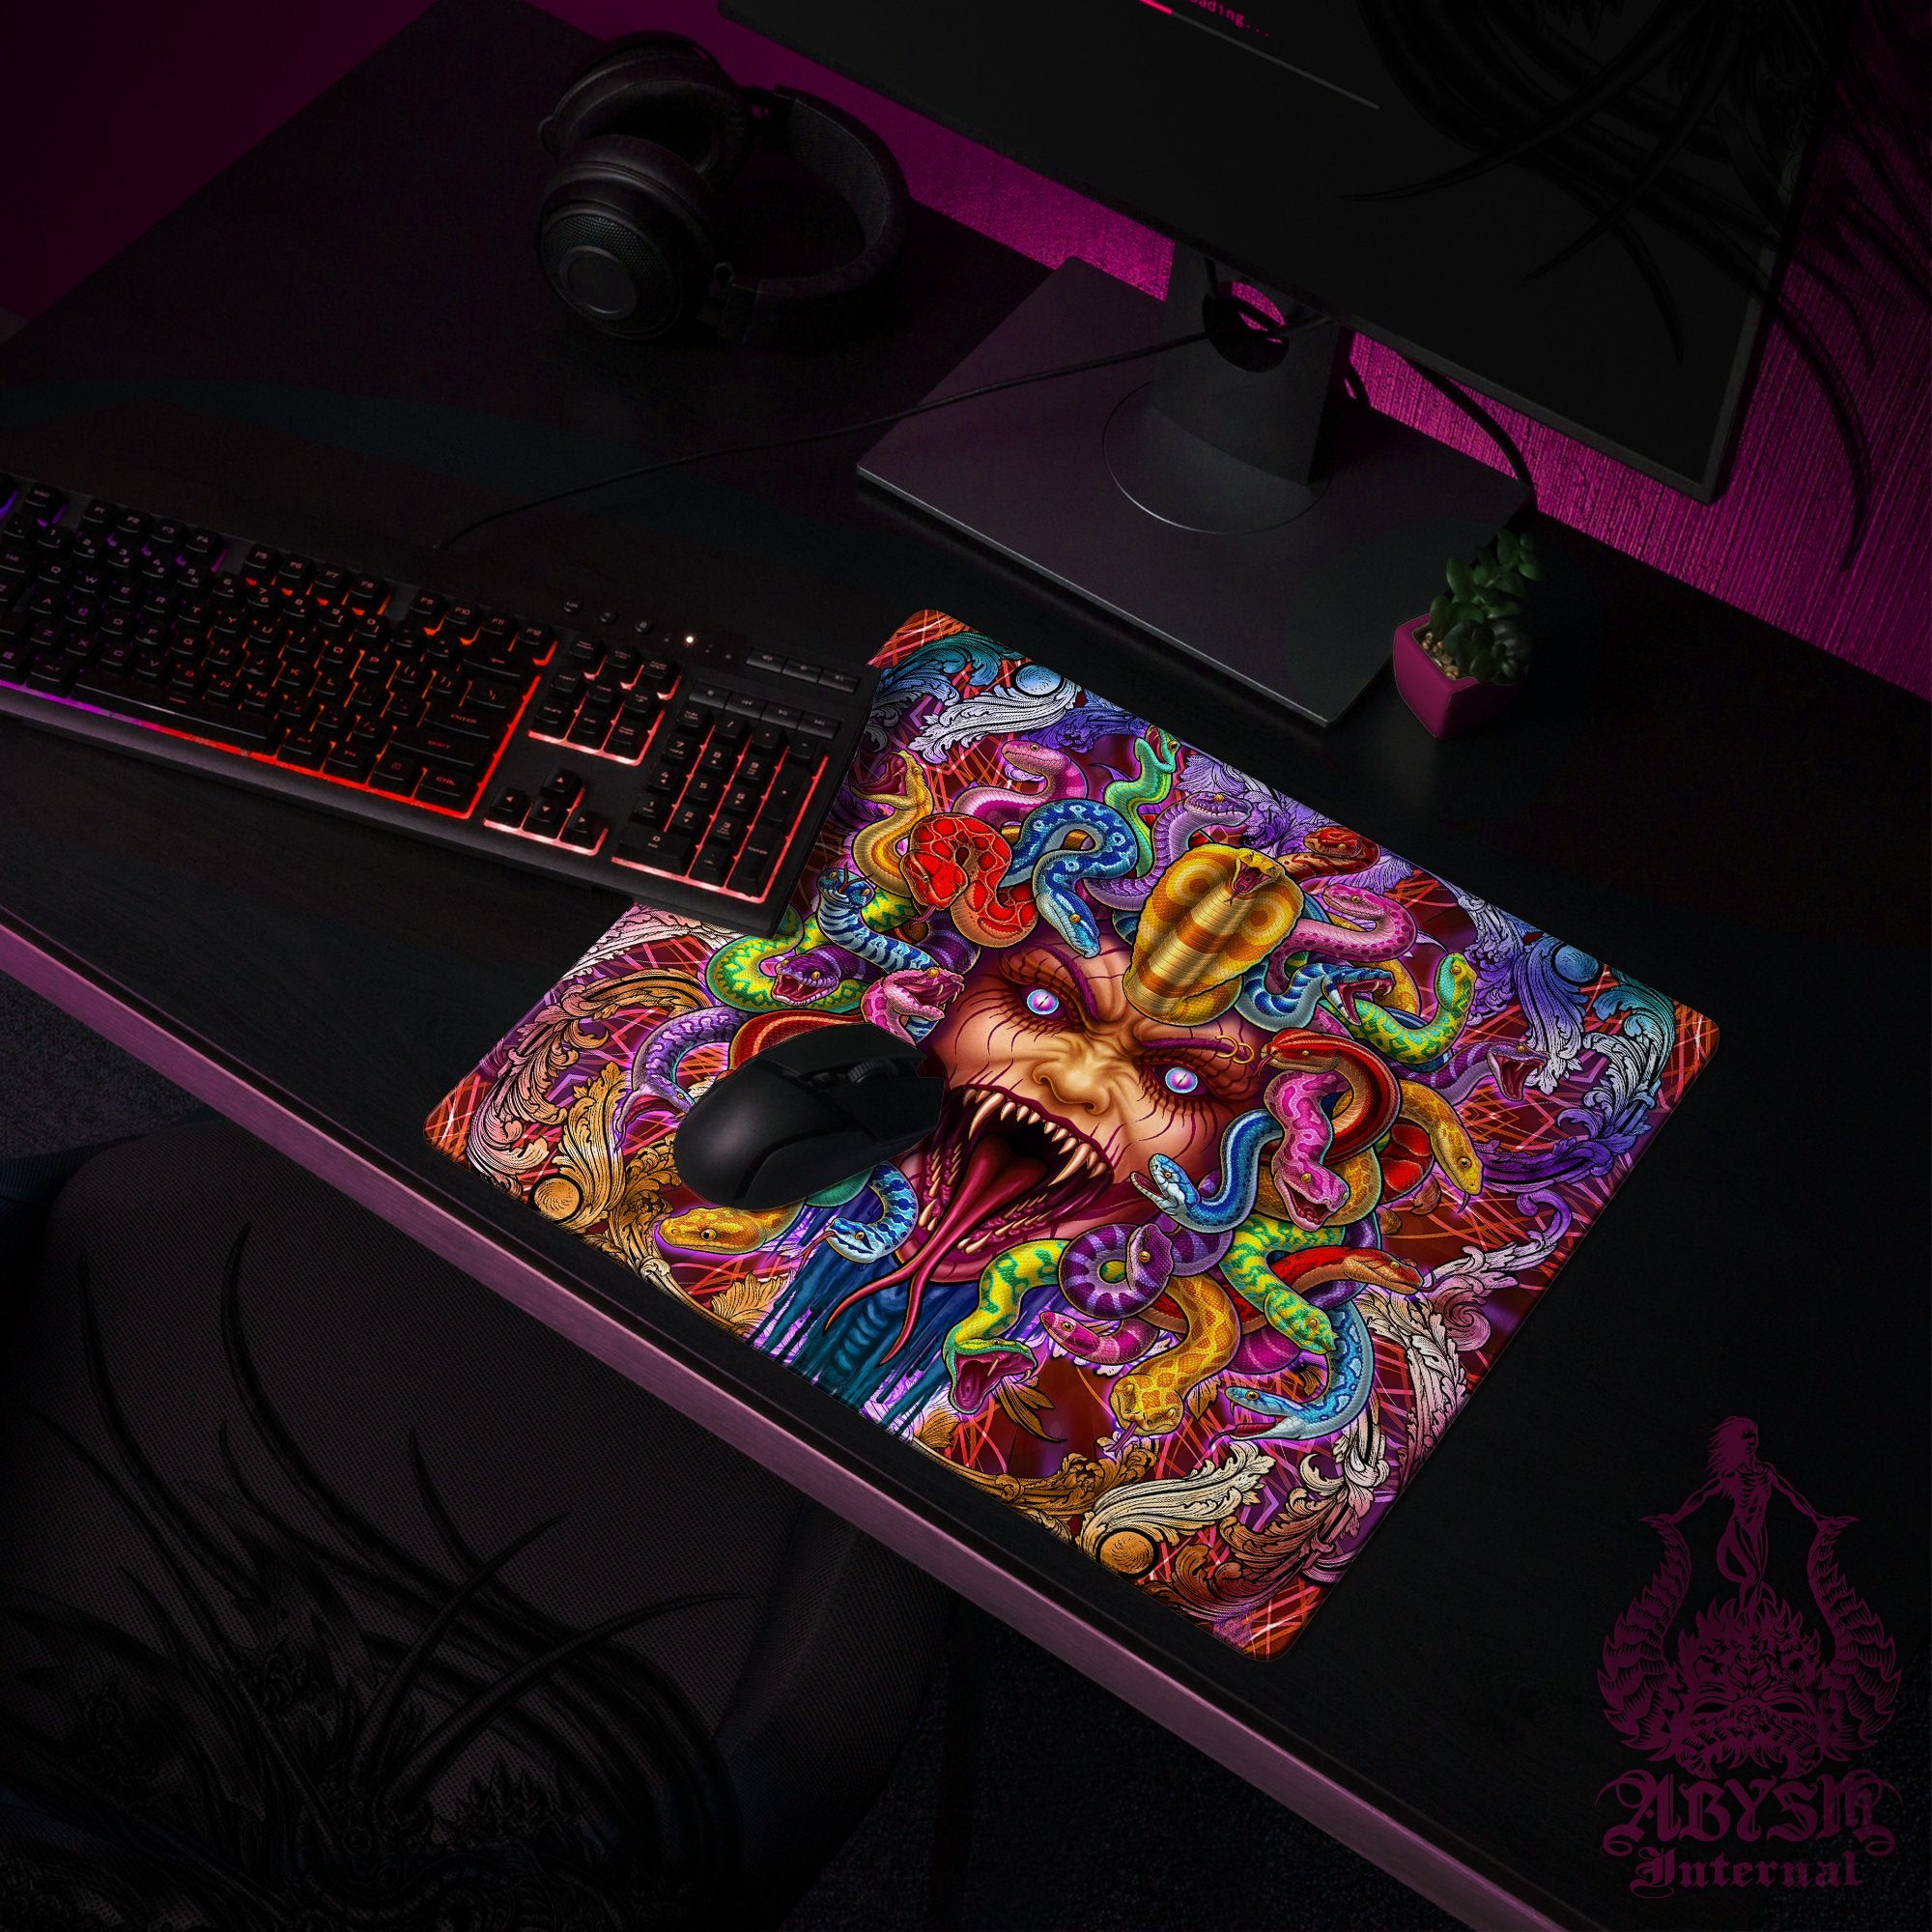 Psychedelic Workpad, Gamer Desk Mat, Medusa Gaming Mouse Pad, Colorful Indie Table Protector Cover, Fantasy Art Print - Psy, 2 Colors - Abysm Internal